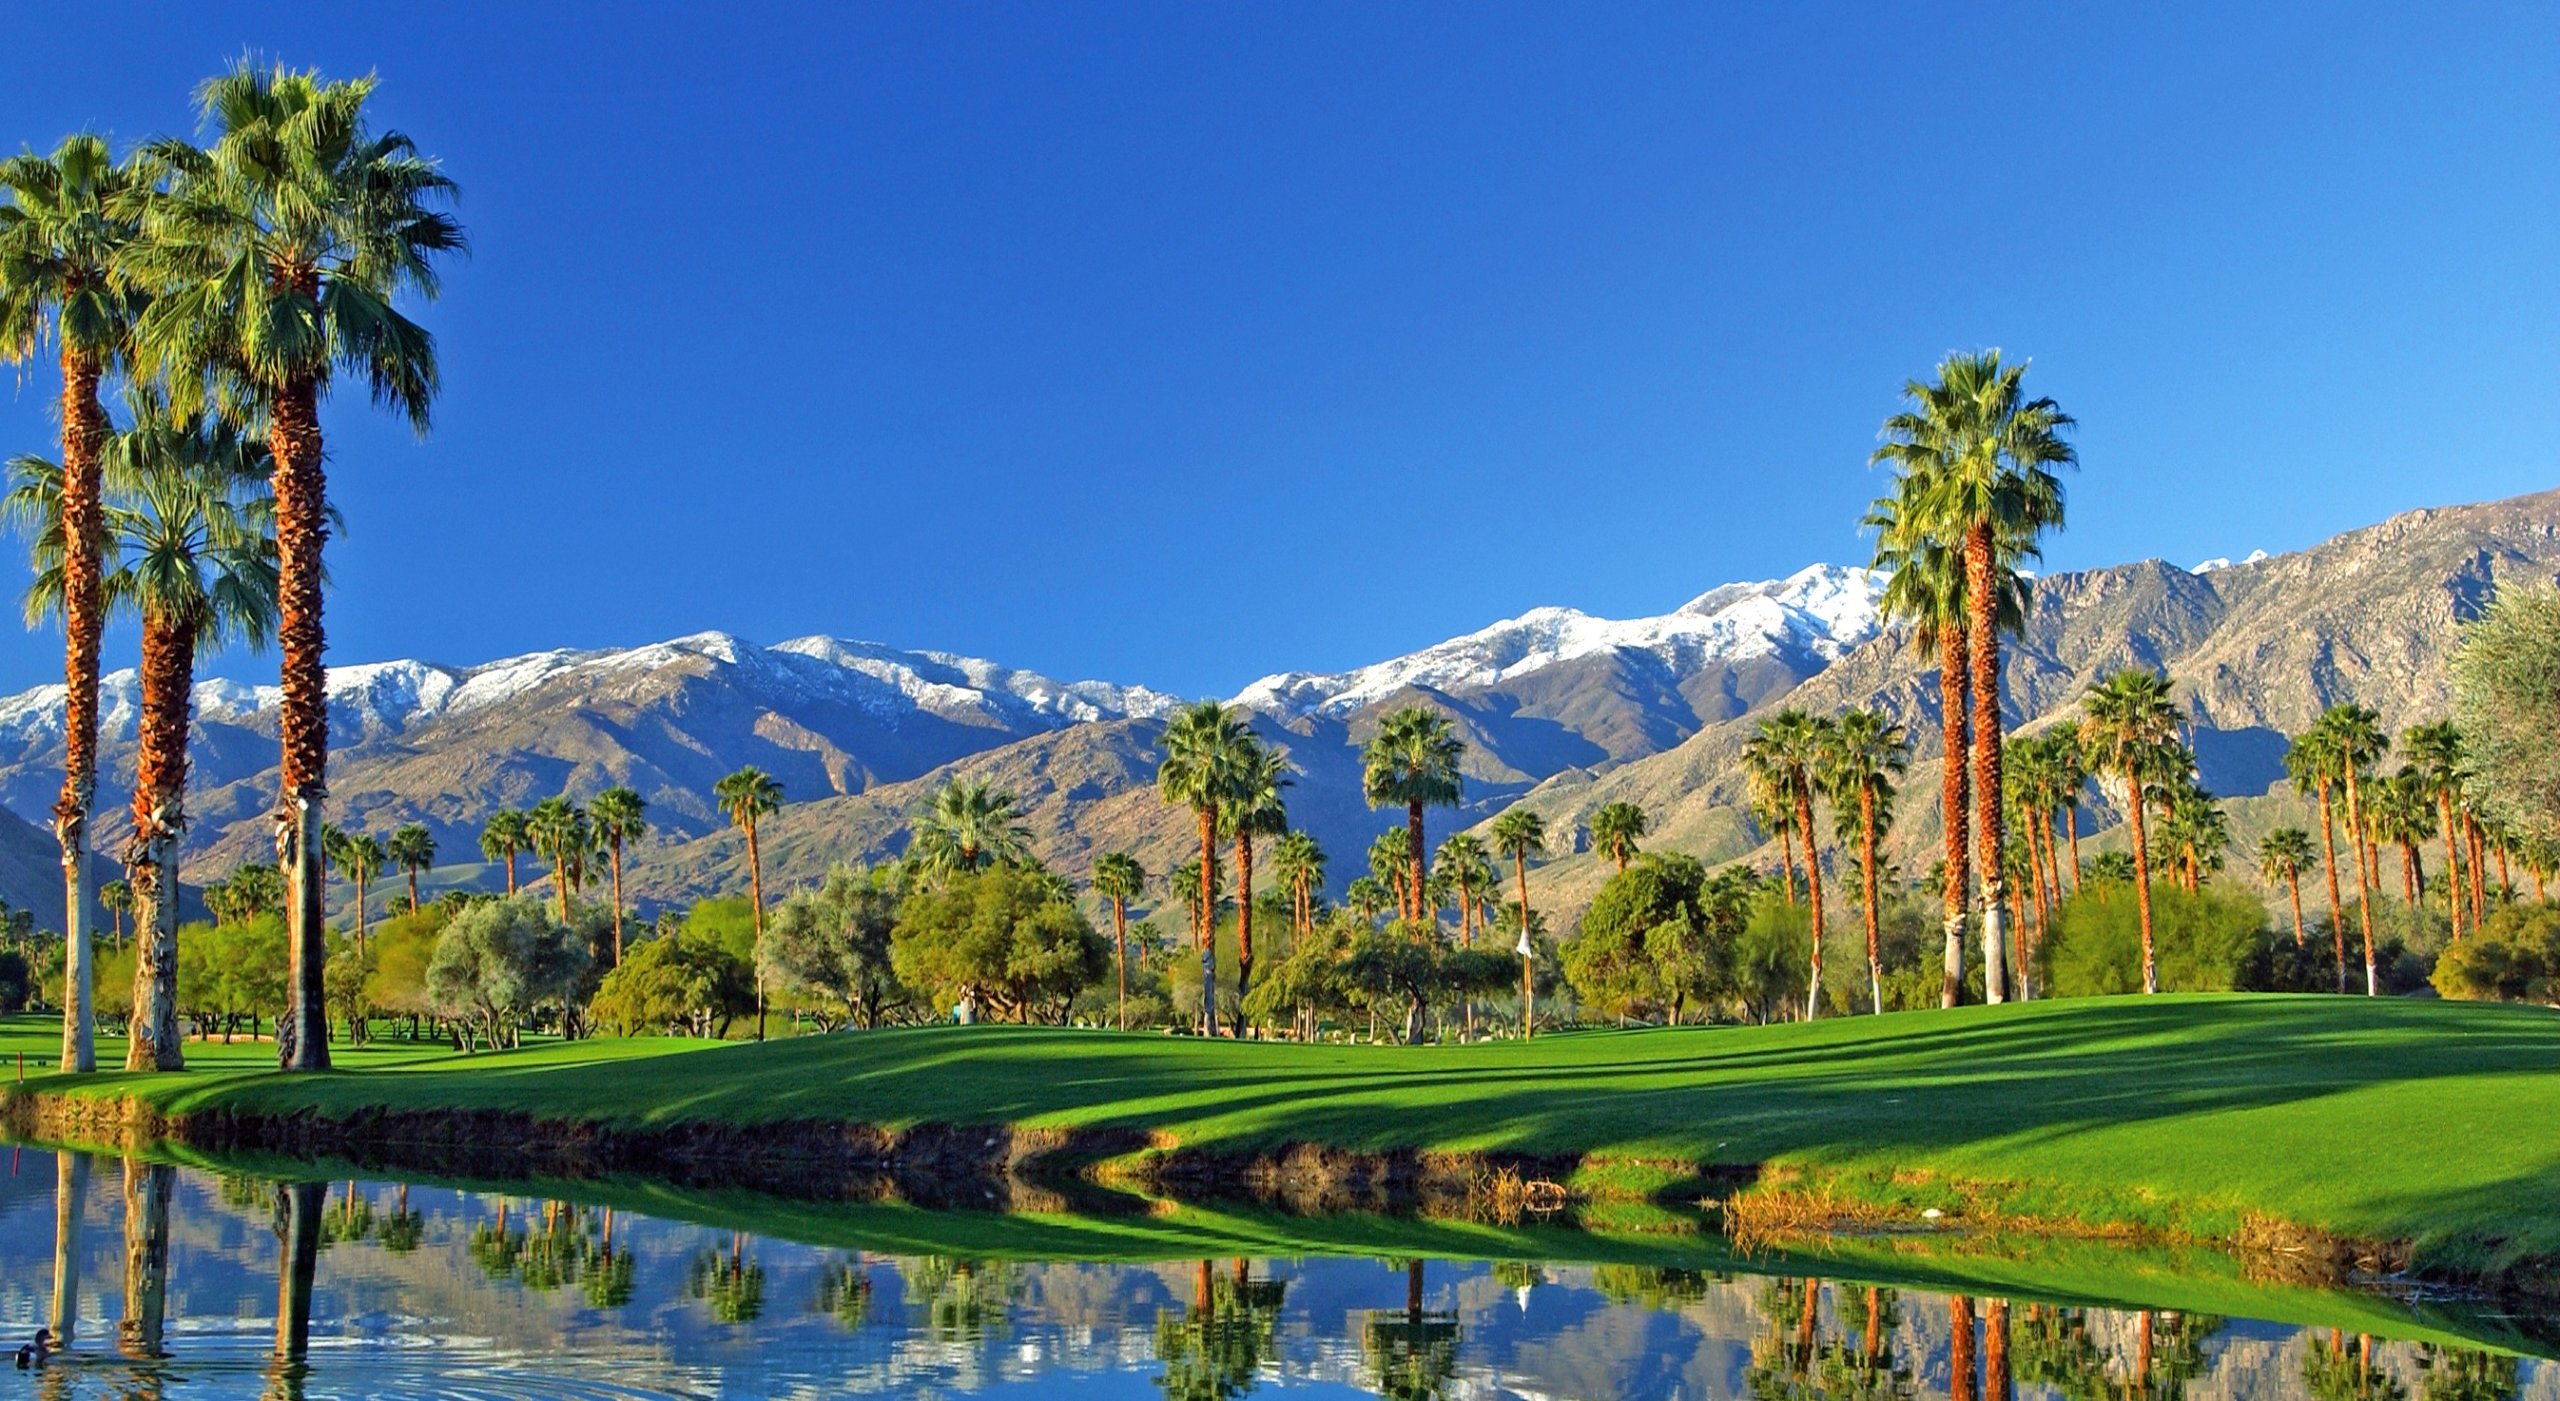 Toronto to Palm Springs, California | $349 CAD roundtrip including taxes | WestJet